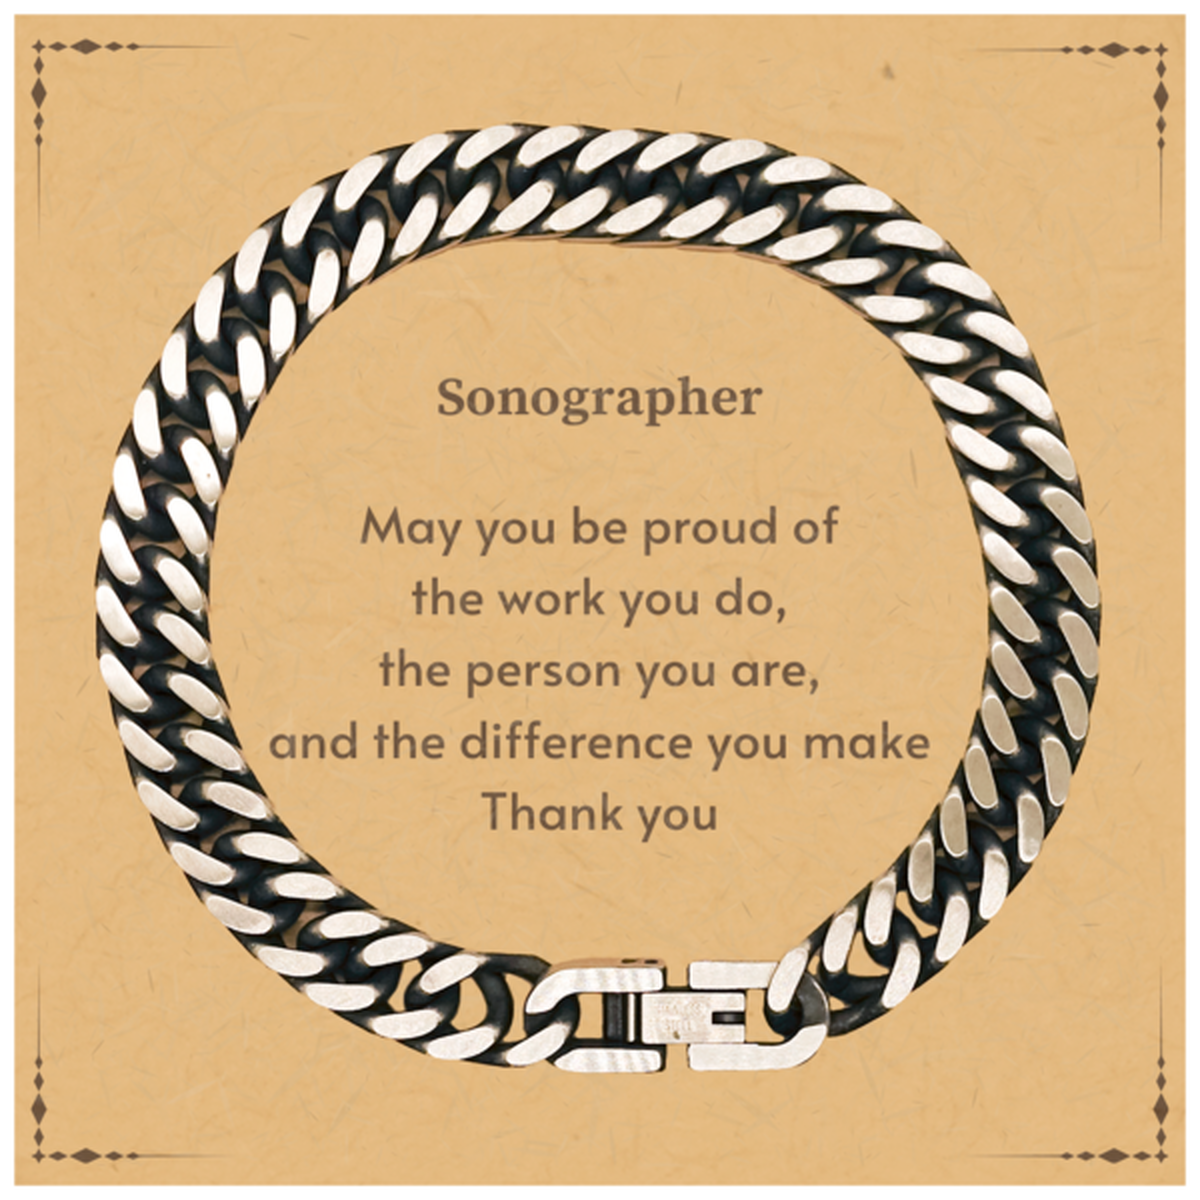 Heartwarming Cuban Link Chain Bracelet Retirement Coworkers Gifts for Sonographer, Sonographer May You be proud of the work you do, the person you are Gifts for Boss Men Women Friends